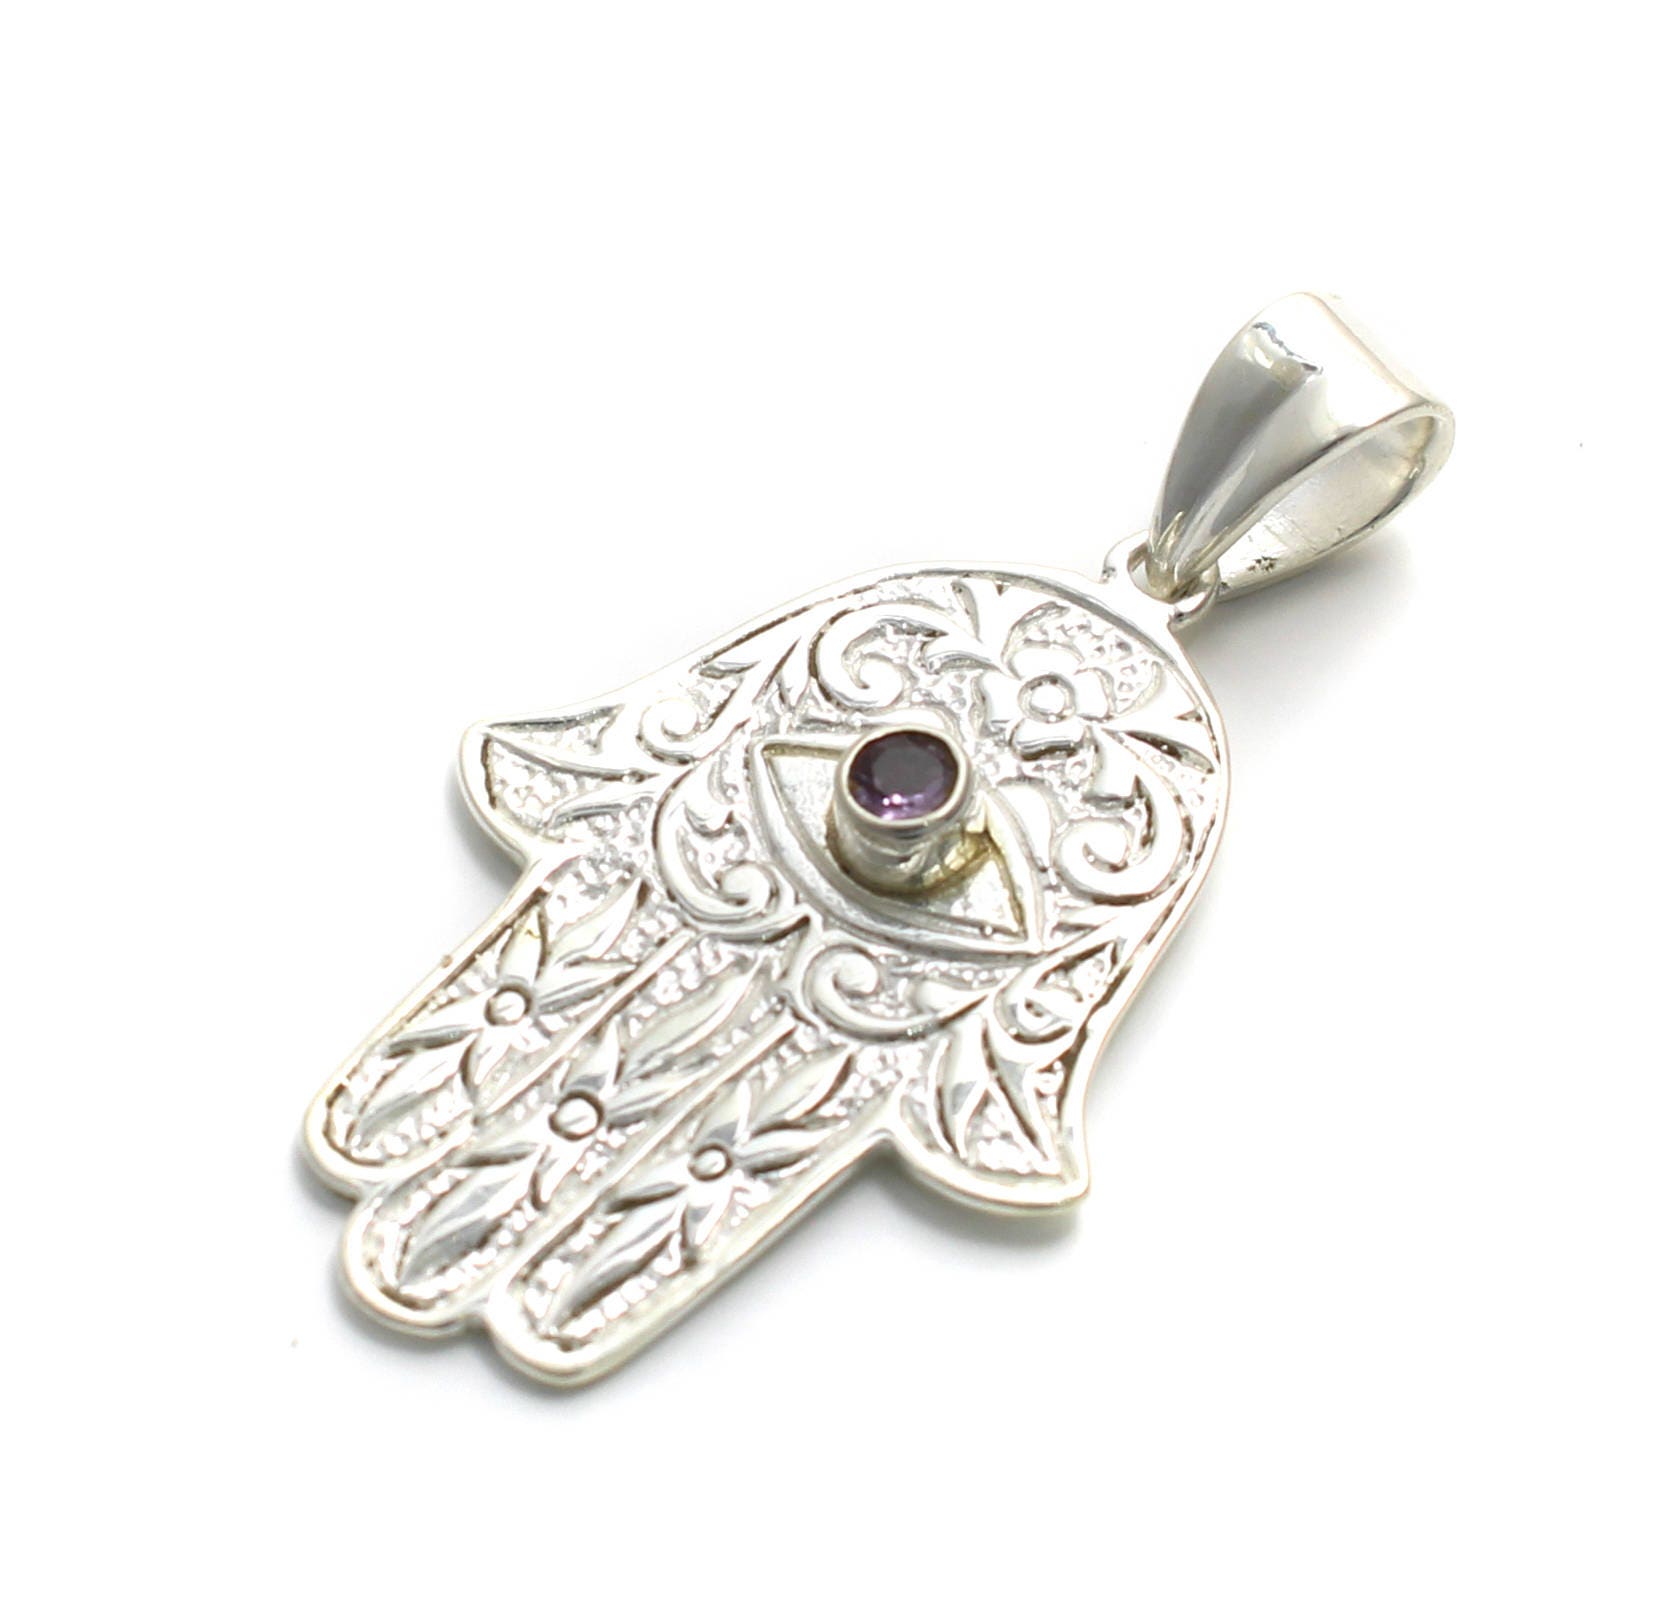 Hand of Fatima 925 Sterling Silver Pendant With Gemstones - Etsy UK